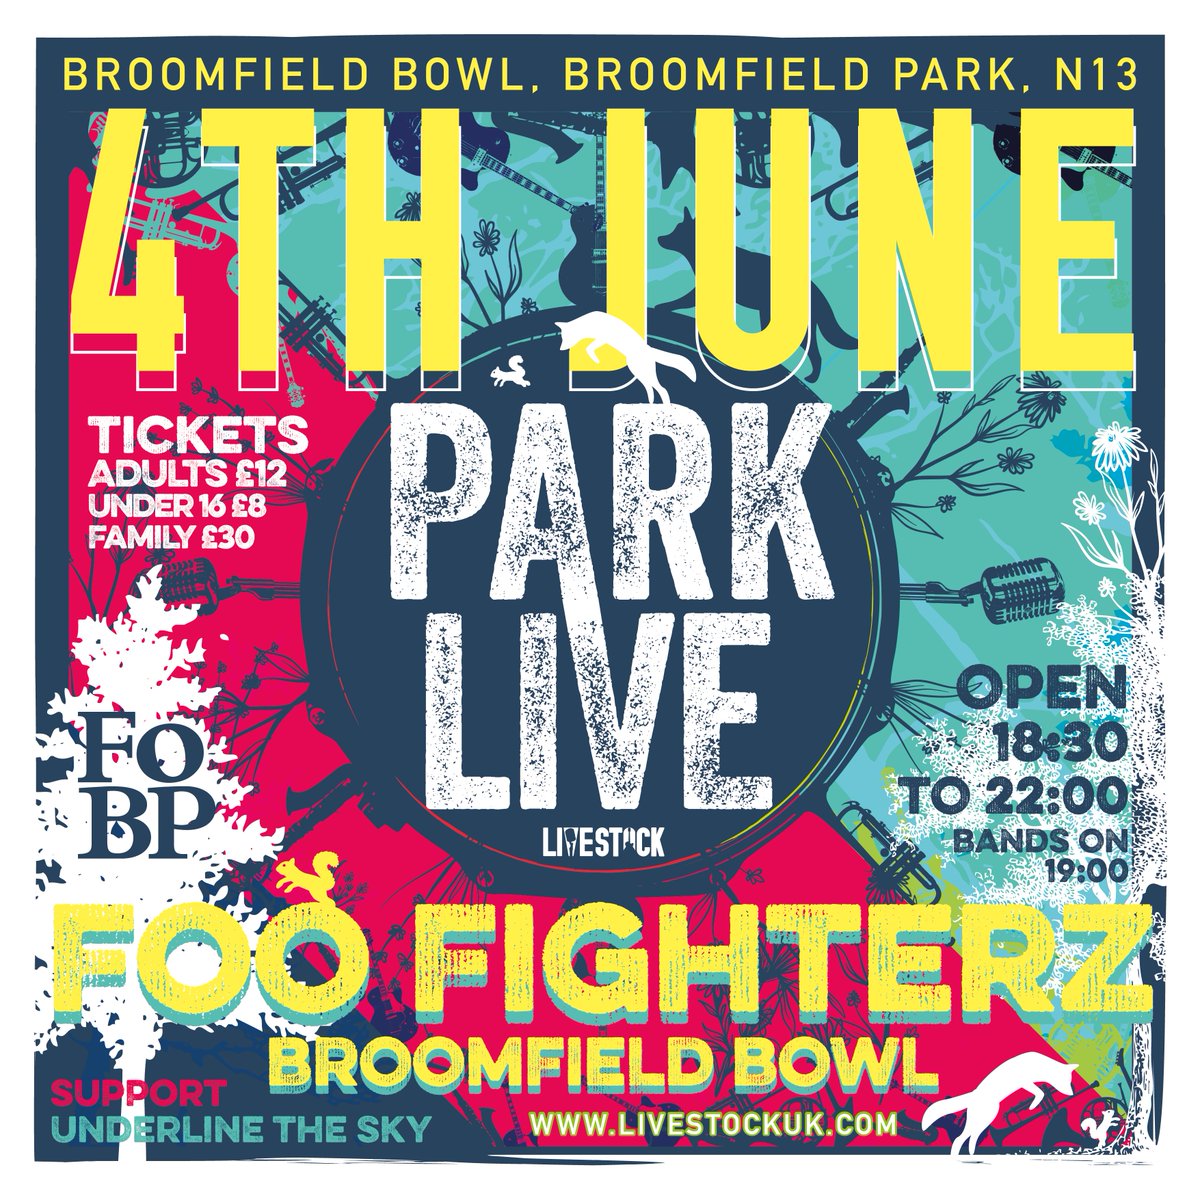 Foo Fighterz and Underline The Sky at Broomfield Bowl. Our first outdoor rock show of the summer. Come and join us! ticketsource.co.uk/friends-of-bro… @Enfield_Fest @UnderlineTheSky @PGCommunity #LivestockMusic #NorthLondon #BroomfieldPark #FooFighters #TaylorHawkins #FooFighterz